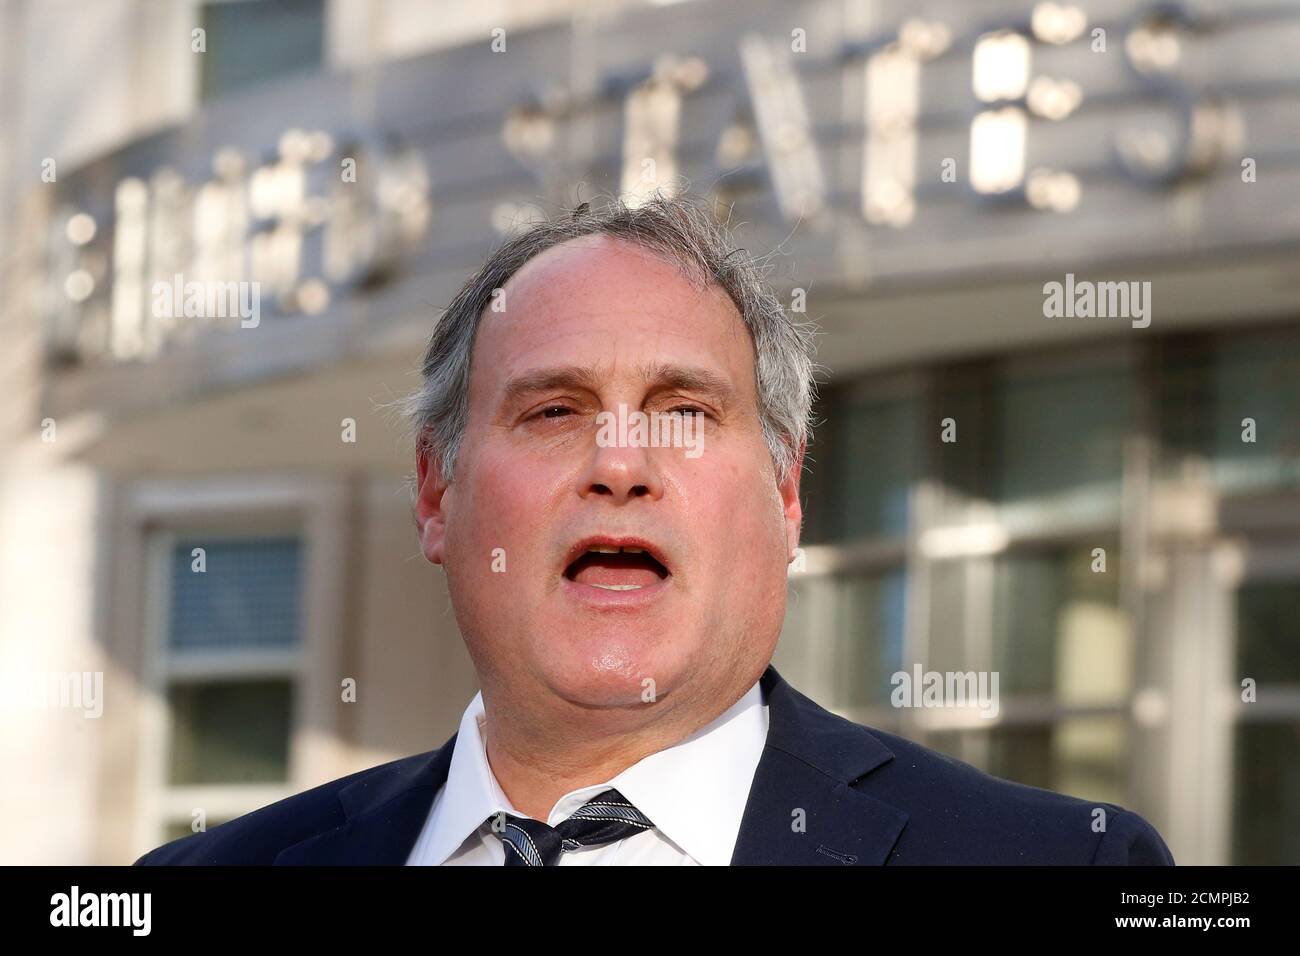 ACLU lead attorney Lee Gelernt speaks to the press following a hearing at  the Brooklyn Federal Courthouse in Brooklyn, New York, ., February 2,  2017. REUTERS/Brendan McDermid Stock Photo - Alamy